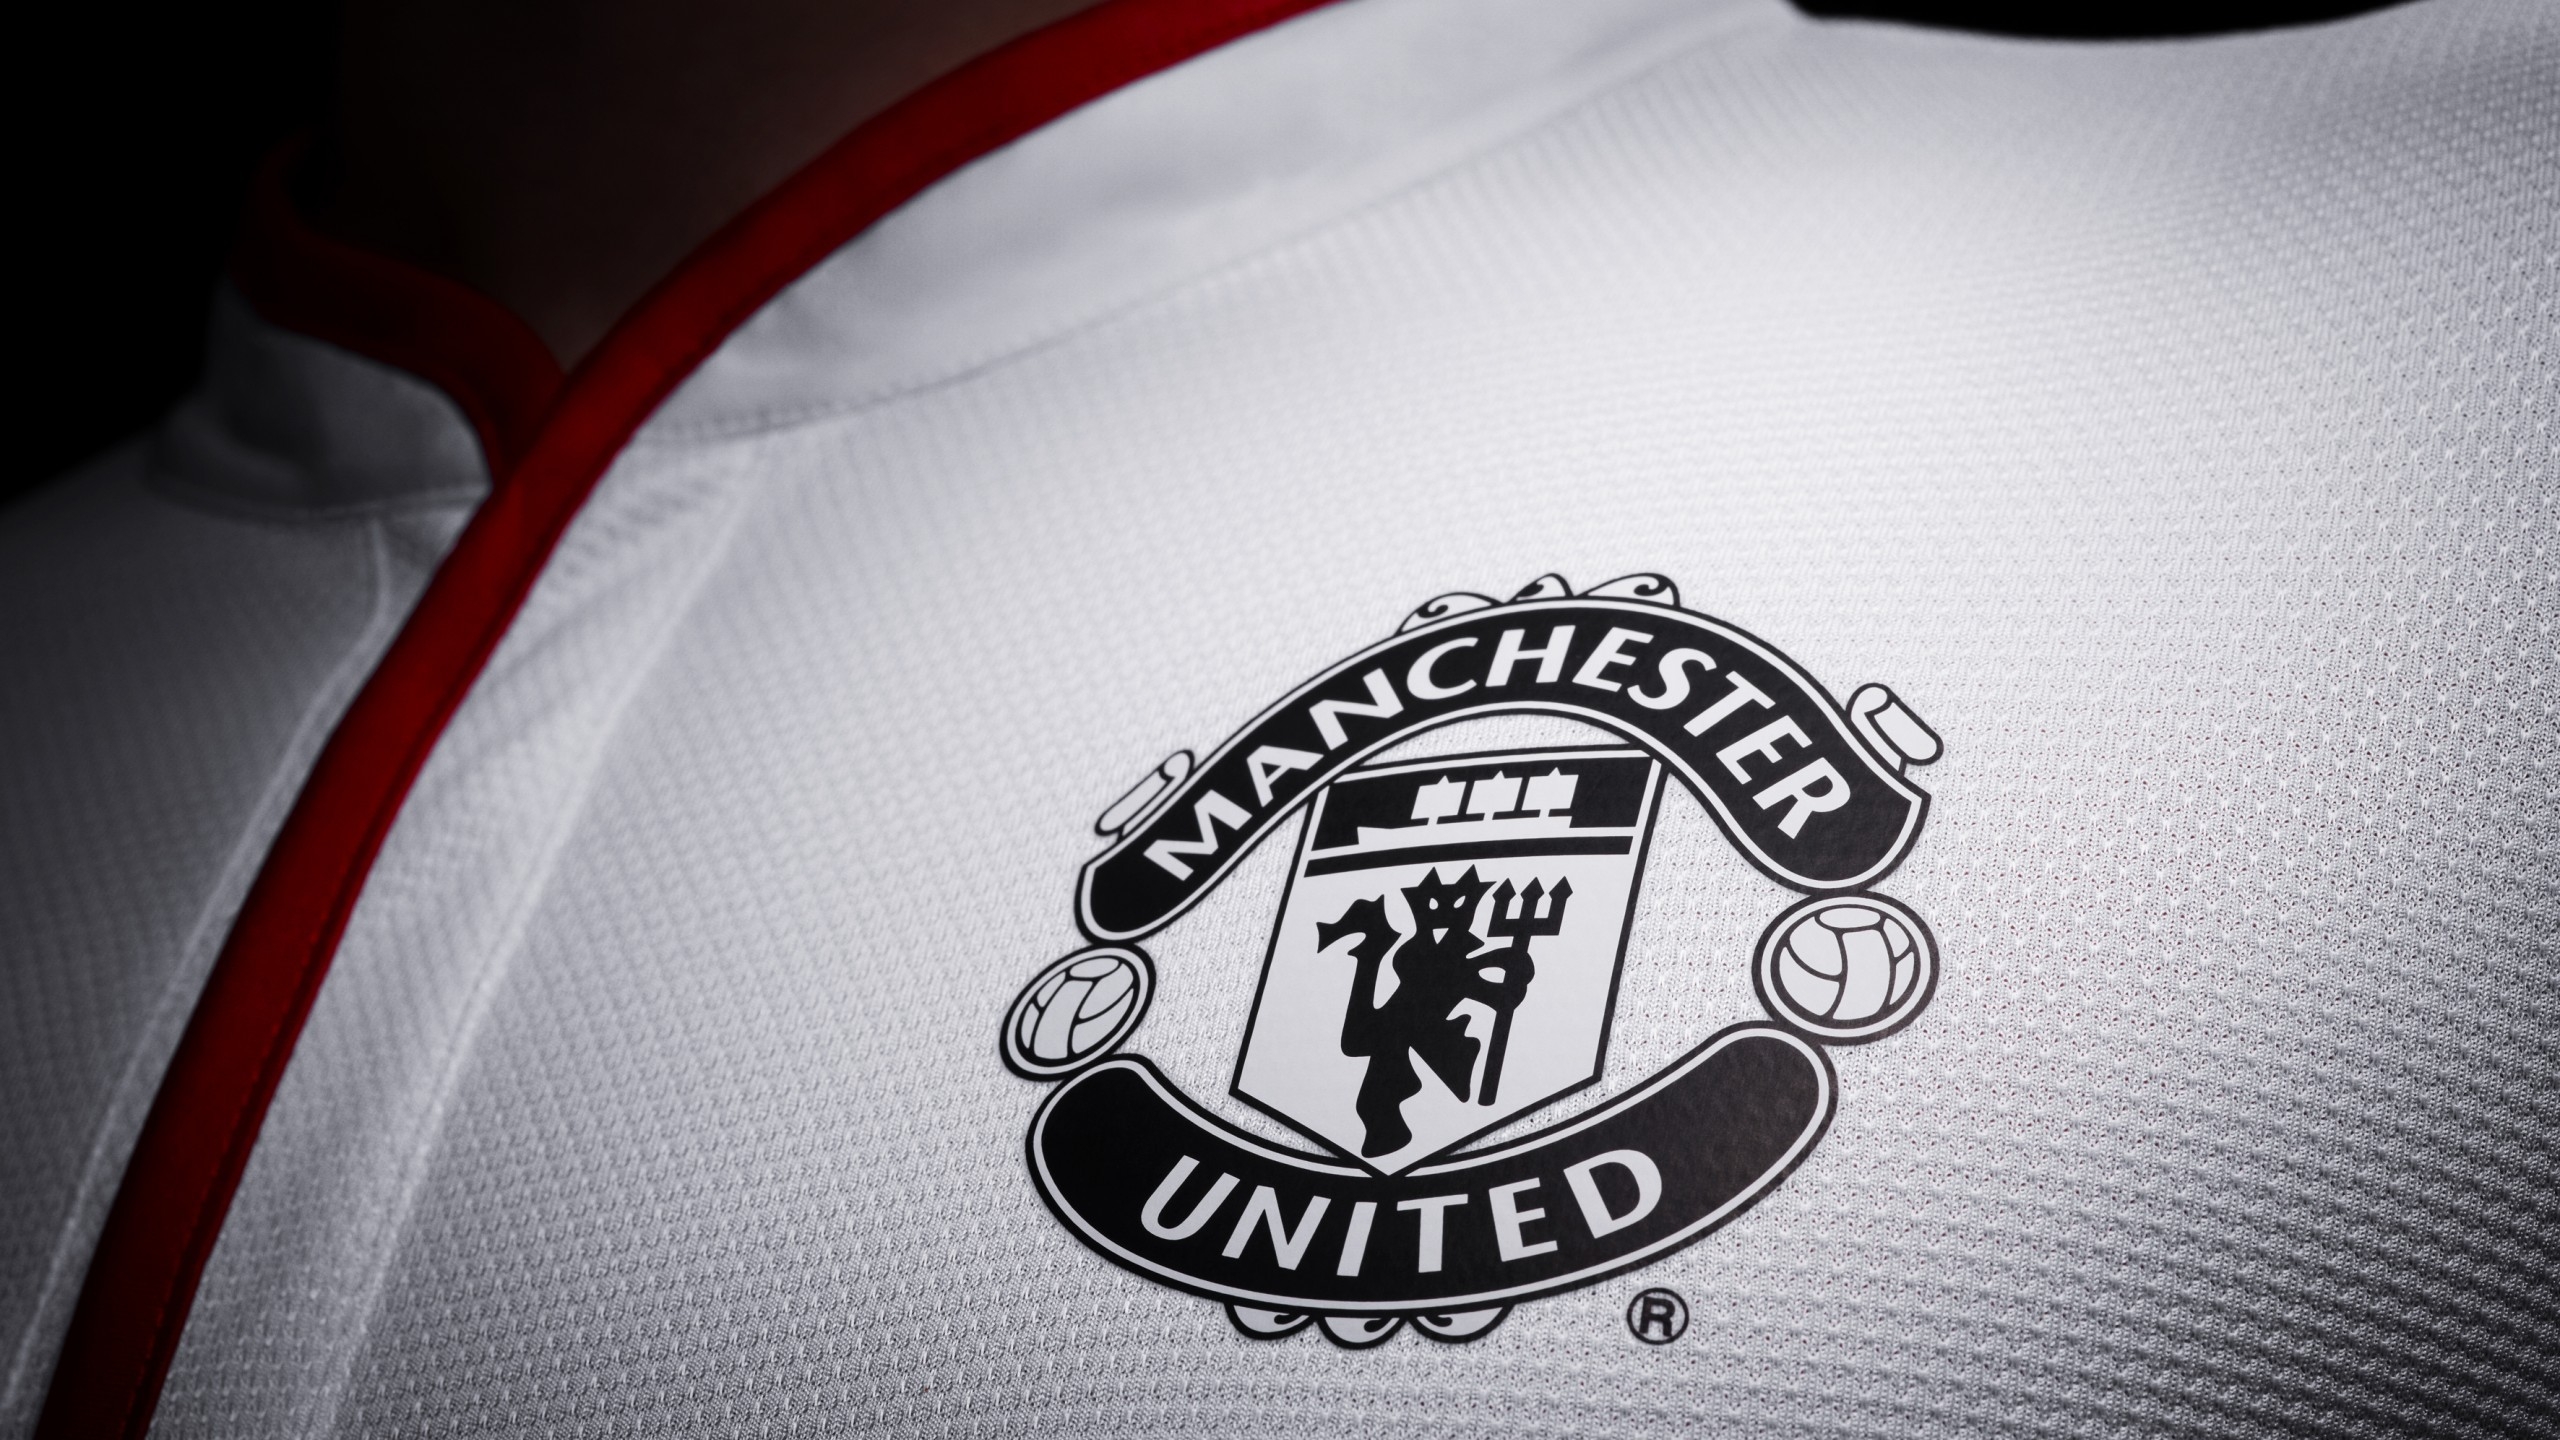 Manchester United Tshirts for 2560x1440 HDTV resolution